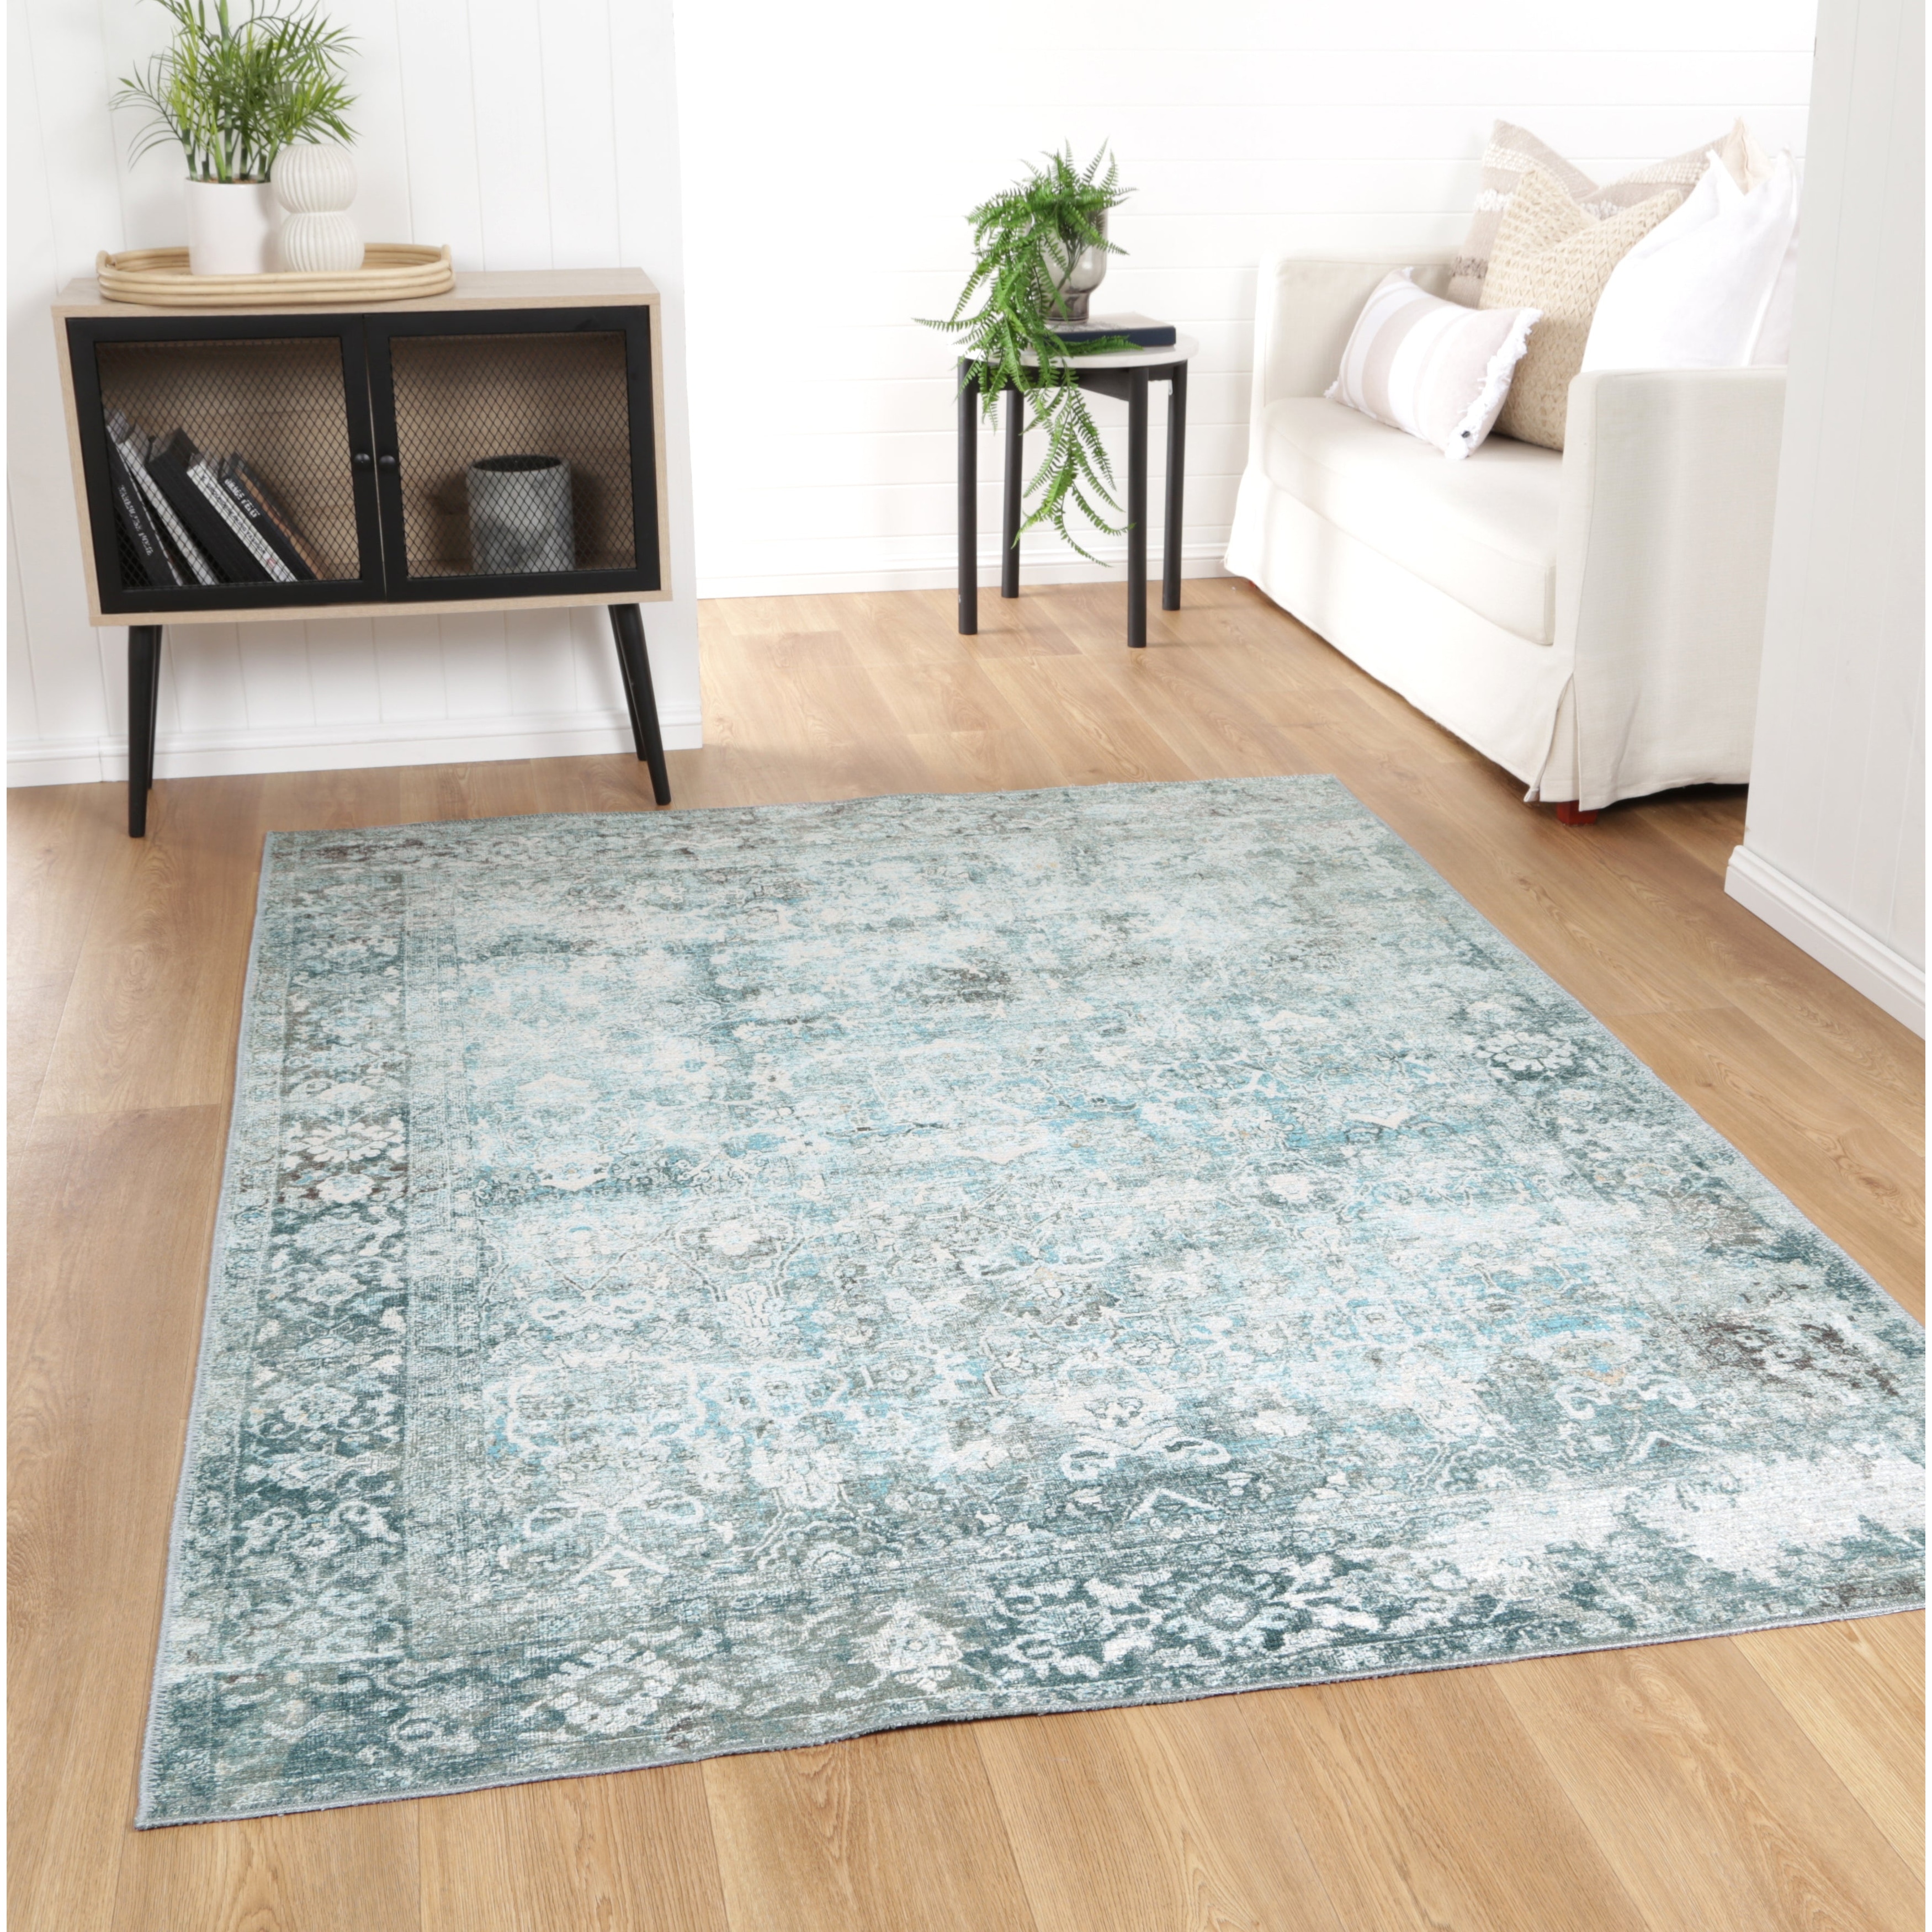 https://ak1.ostkcdn.com/images/products/is/images/direct/563122cdb5b6dab76cbcc9b307f8d532b86f59d8/The-Rug-Collective-Rania-Machine-Washable-Area-Rug.jpg